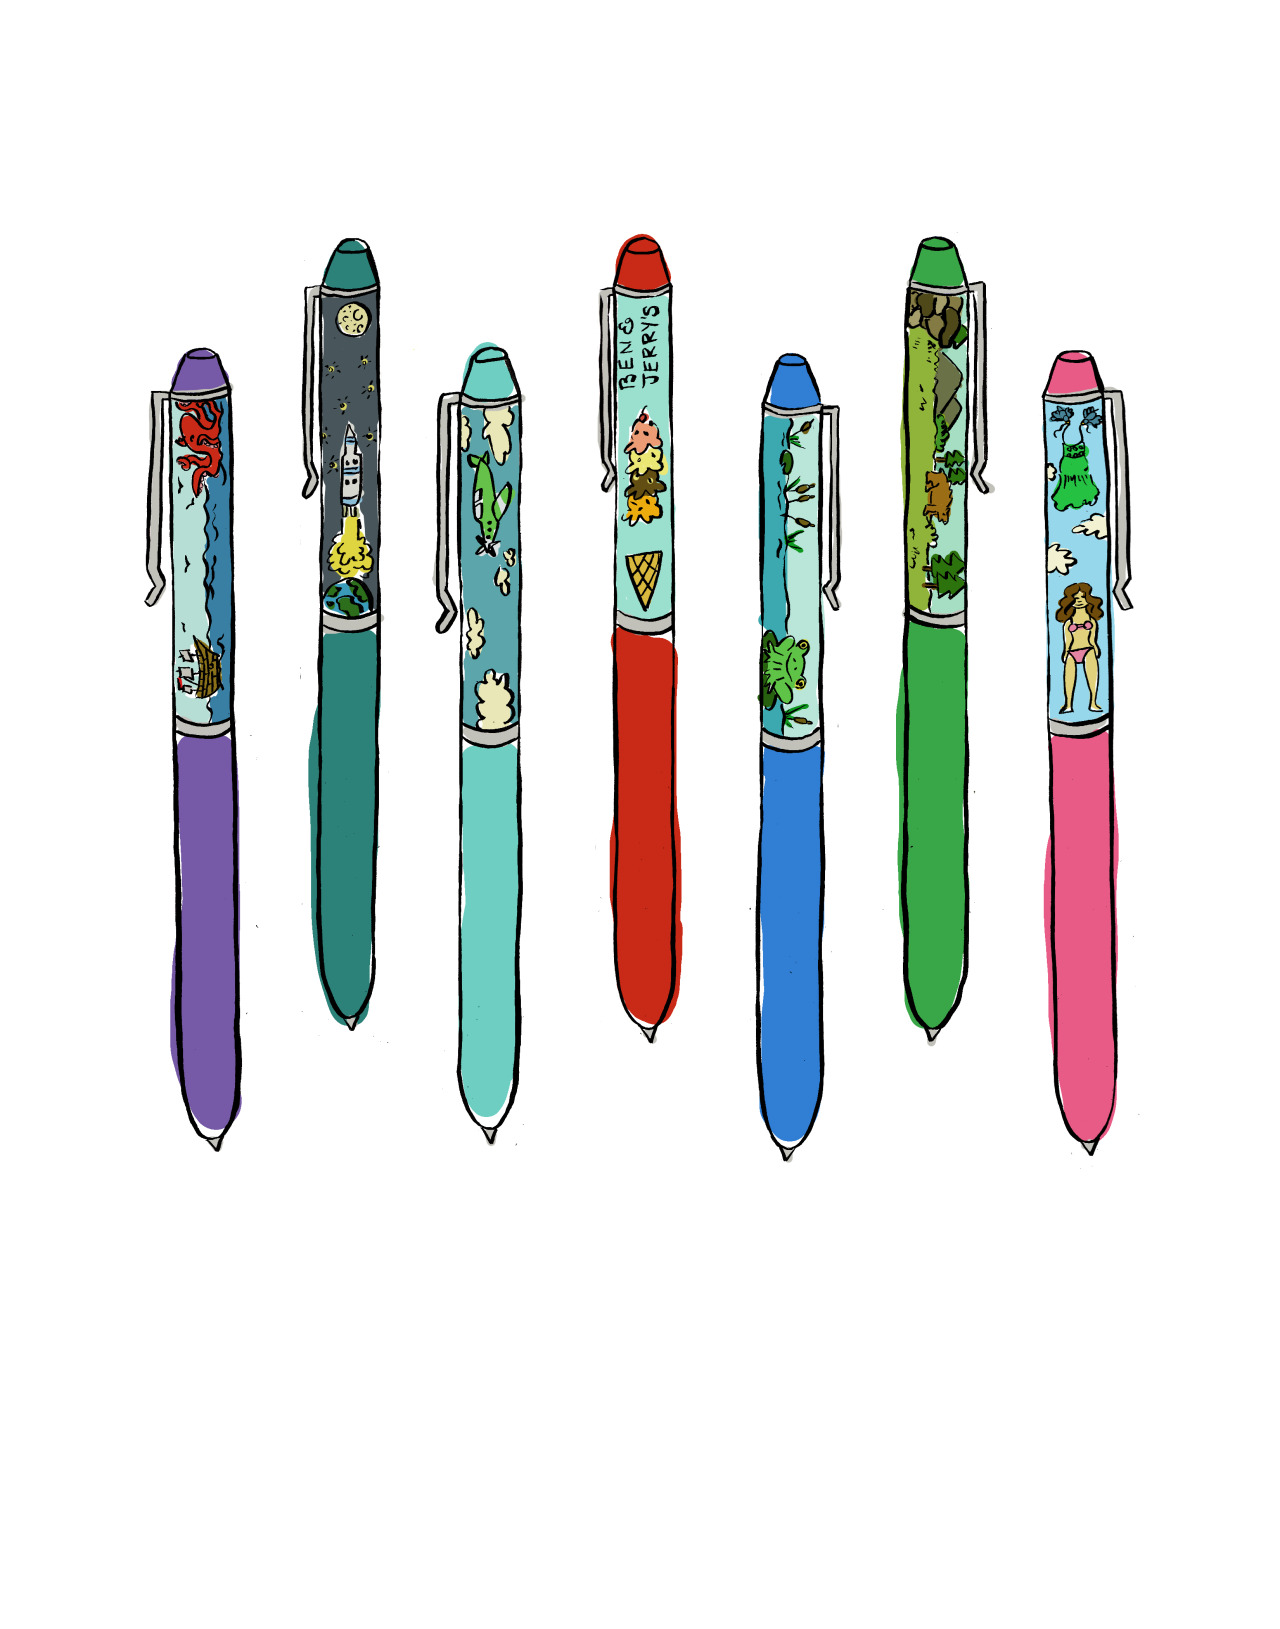 Floaty Pen Collection http://kat-rinacastle.tumblr.com/